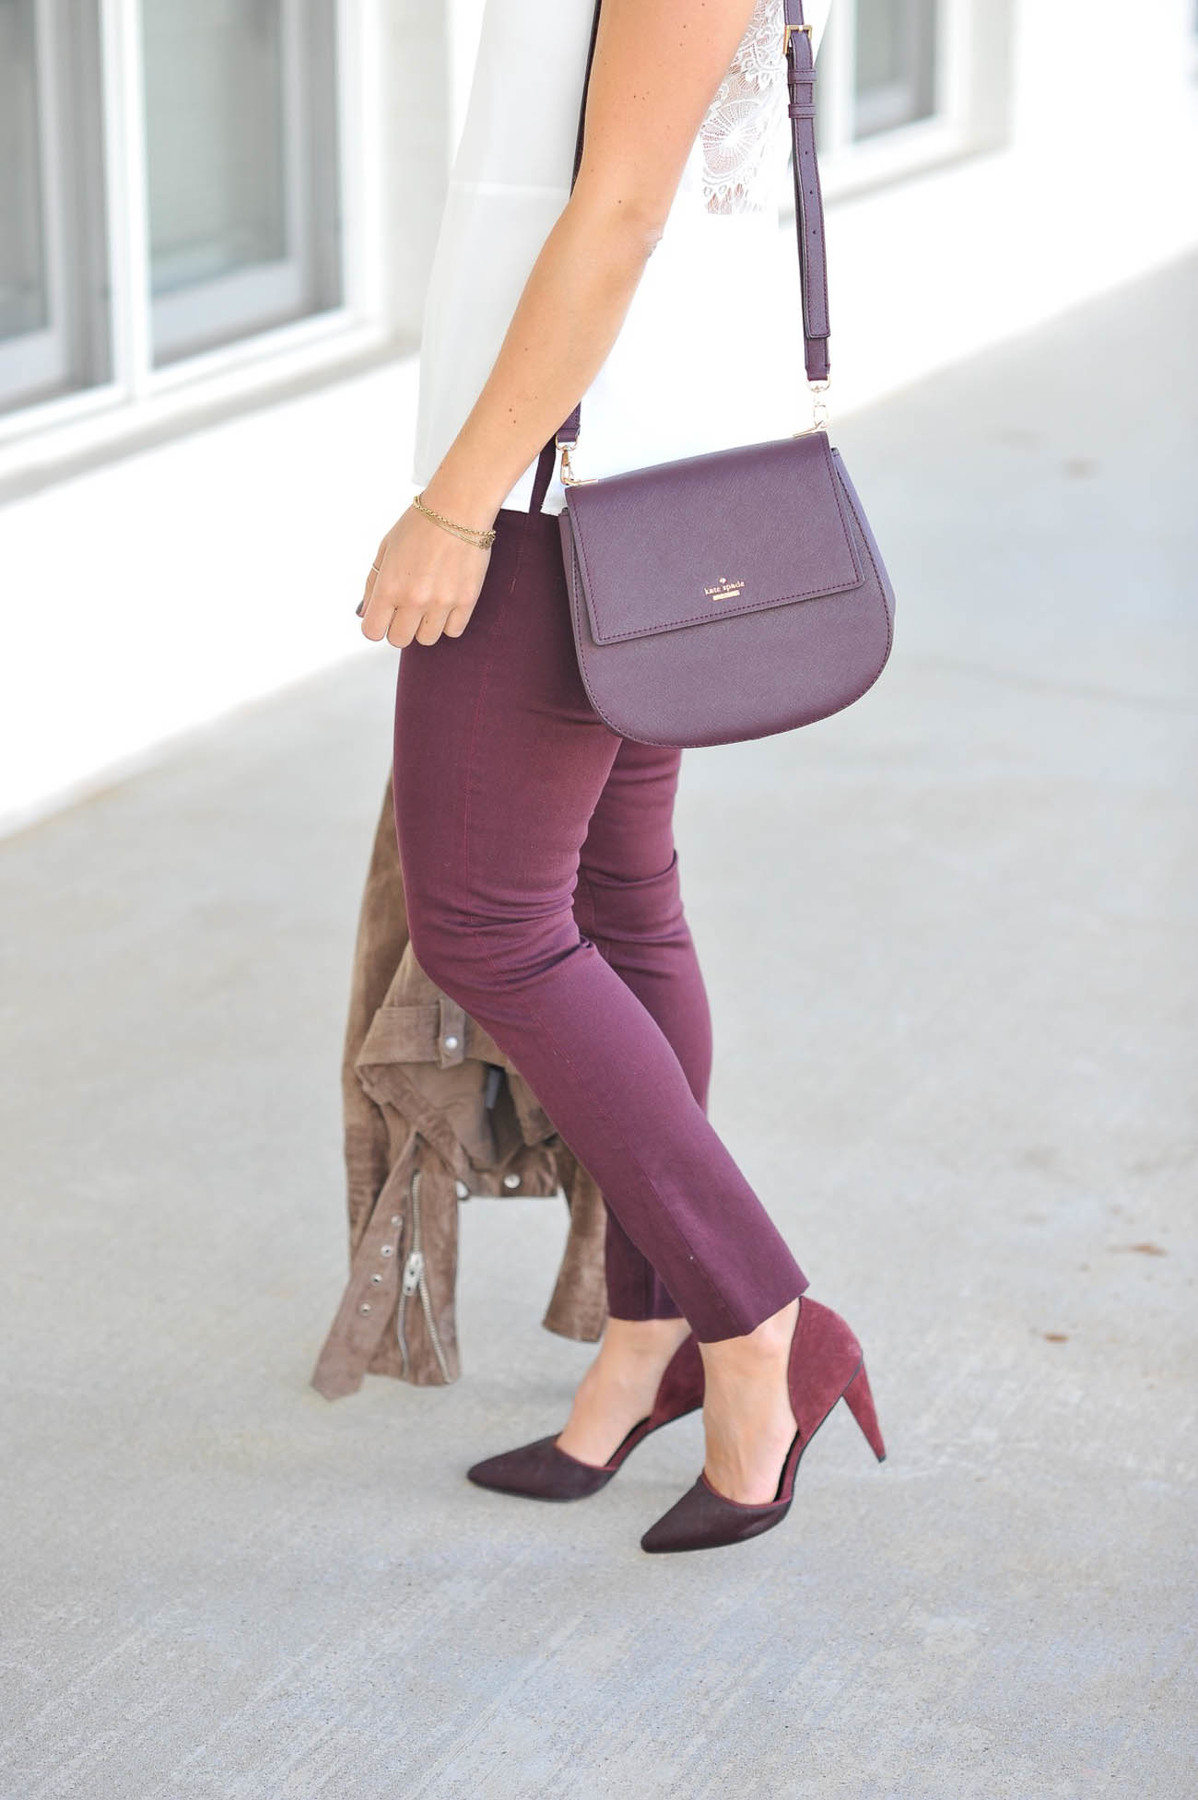 Model wears plum Kate Spade bag and matching plum pants and shoes.